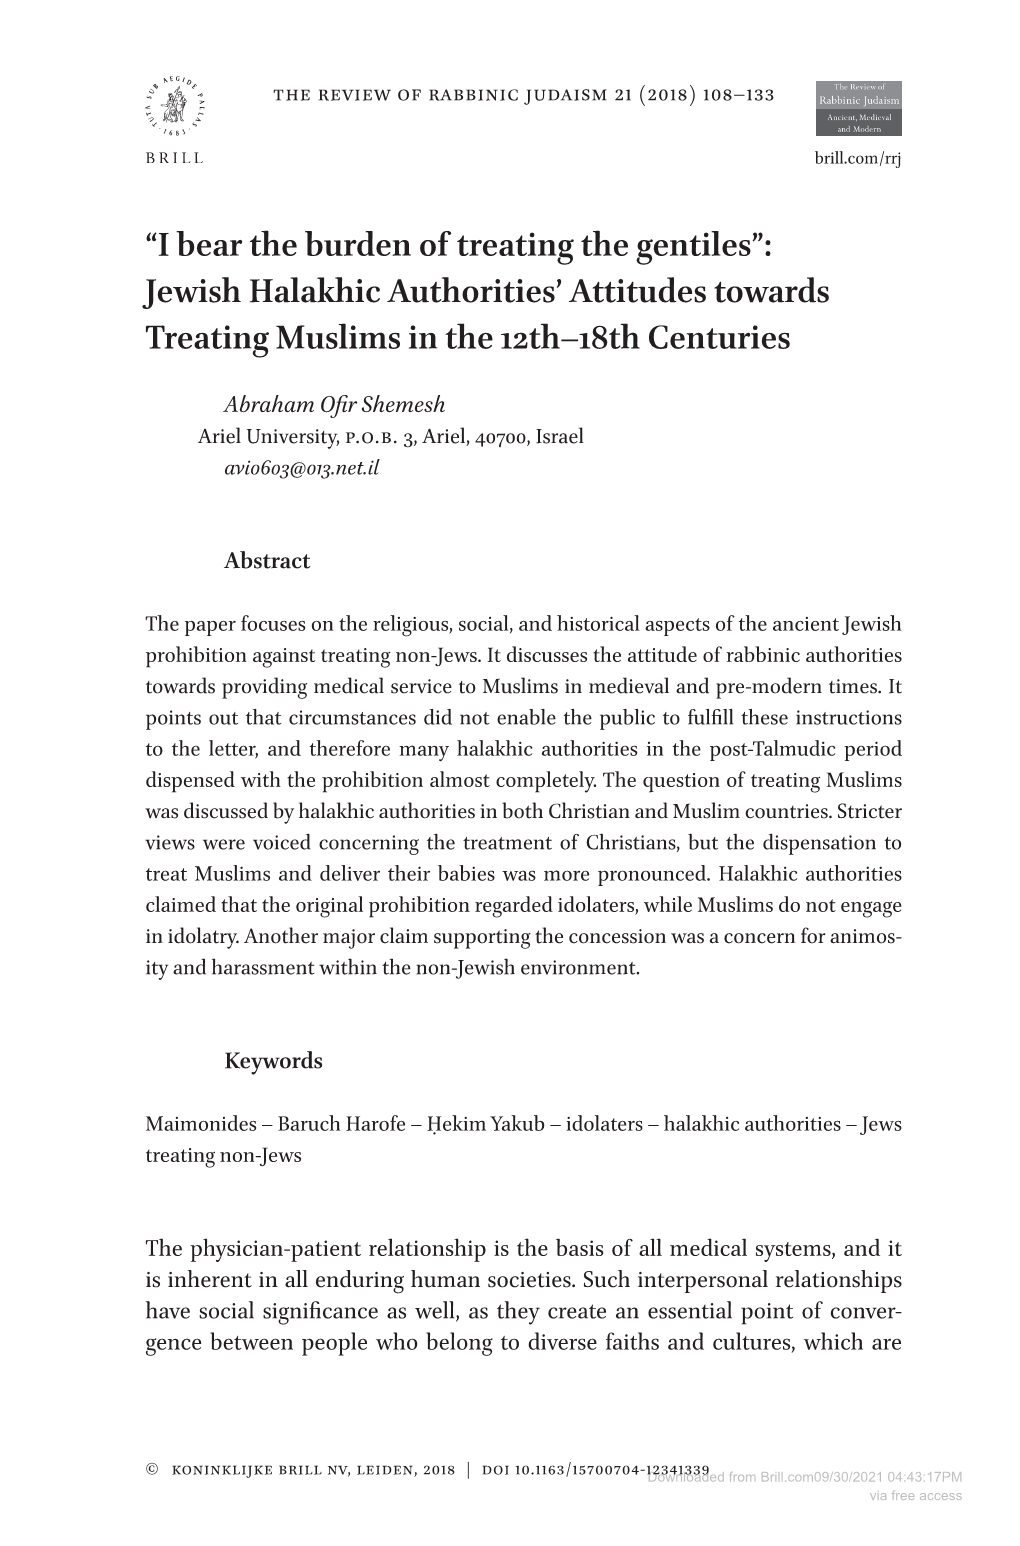 “I Bear the Burden of Treating the Gentiles”: Jewish Halakhic Authorities’ Attitudes Towards Treating Muslims in the 12Th–18Th Centuries